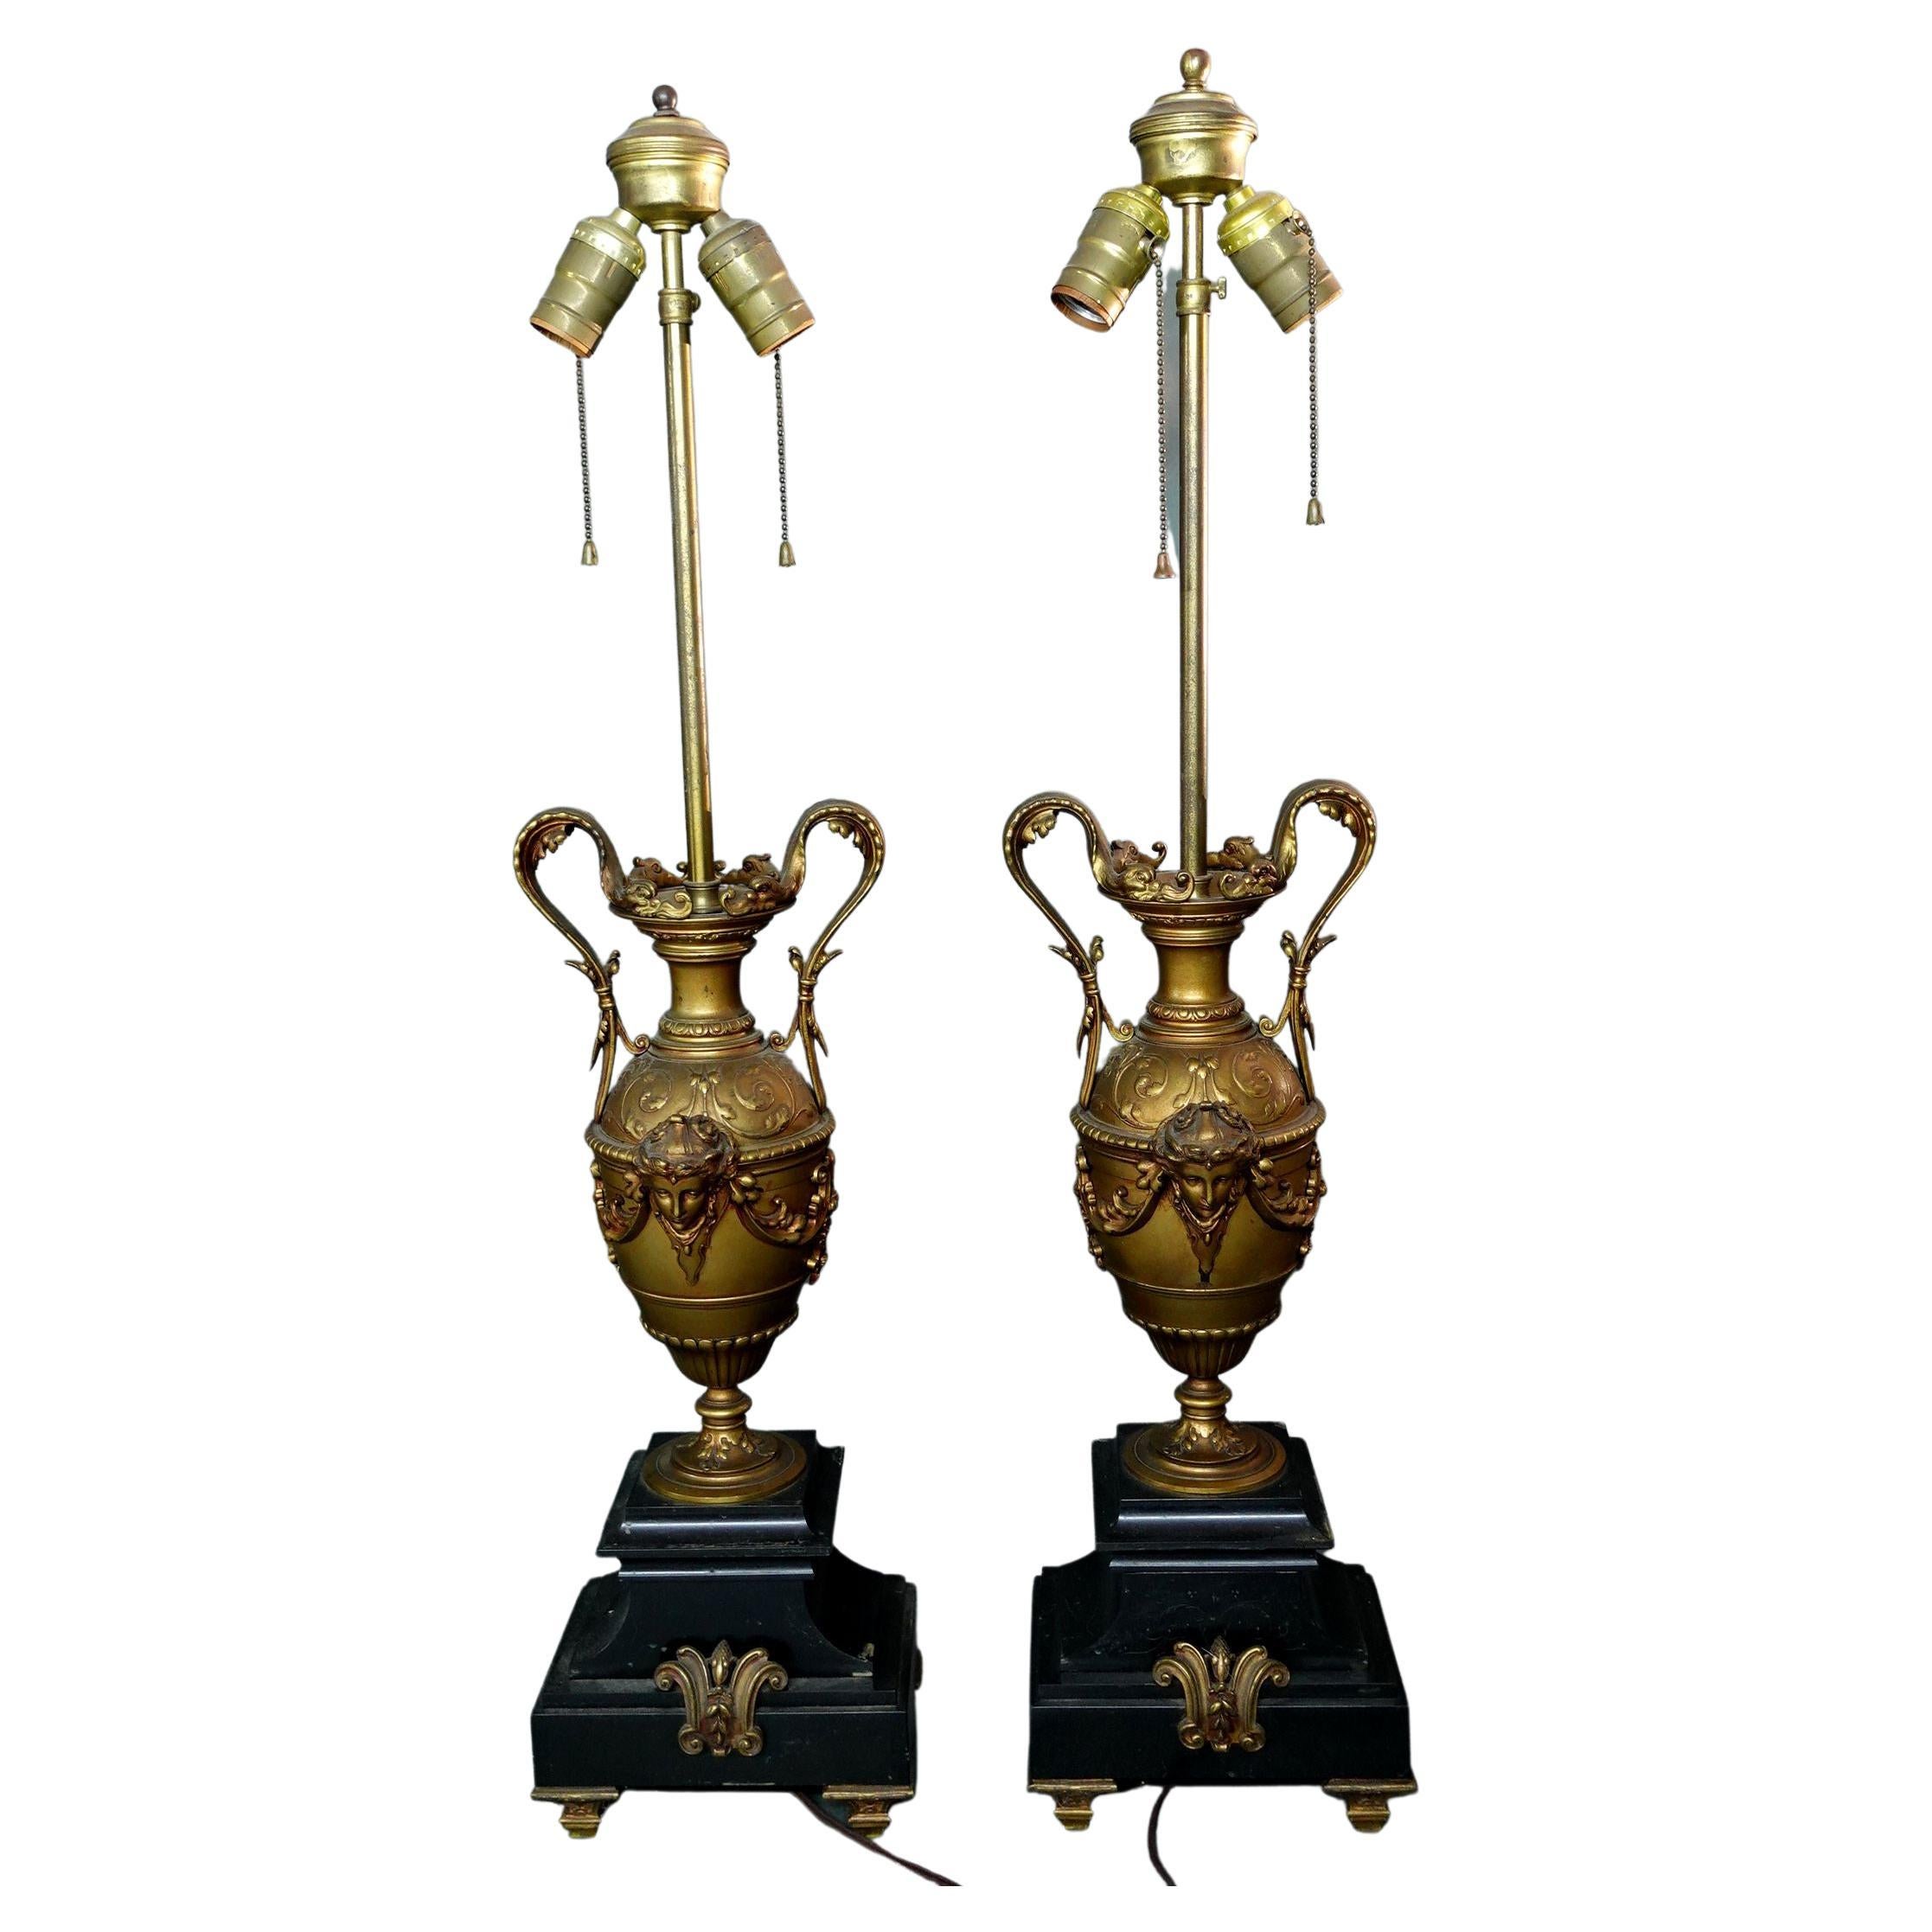 Pair of Neoclassical-Style Gilt-Bronze Urns Lamps on Black Marble Bases